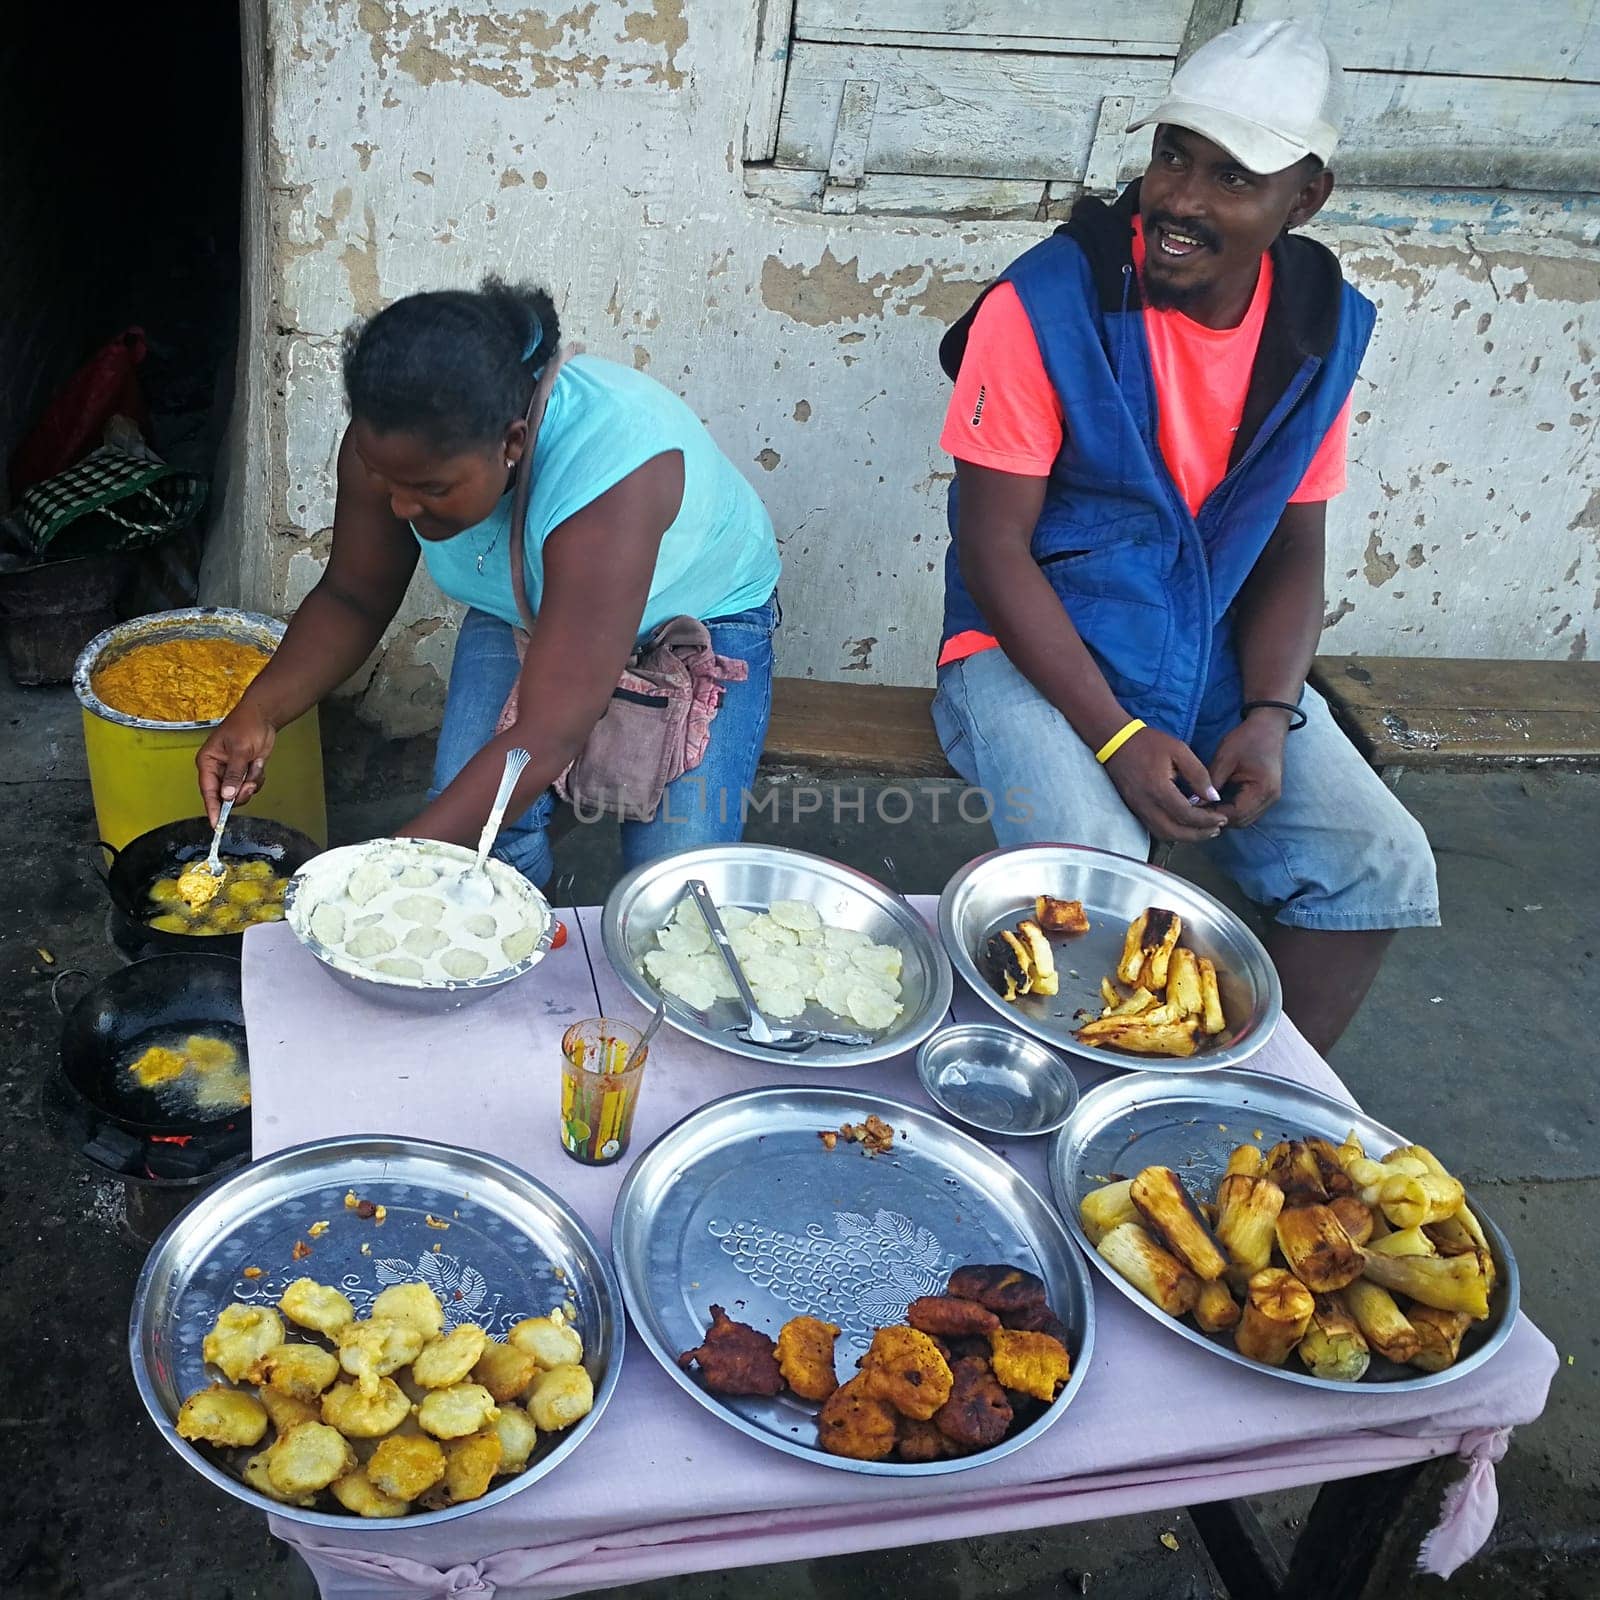 Ranohira, Madagascar - April 29, 2019: Unknown Malagasy woman cooks on the street, deep frying various coated vegetables, another man sits next to her on wooden bench. Food is often cooked at streets by Ivanko